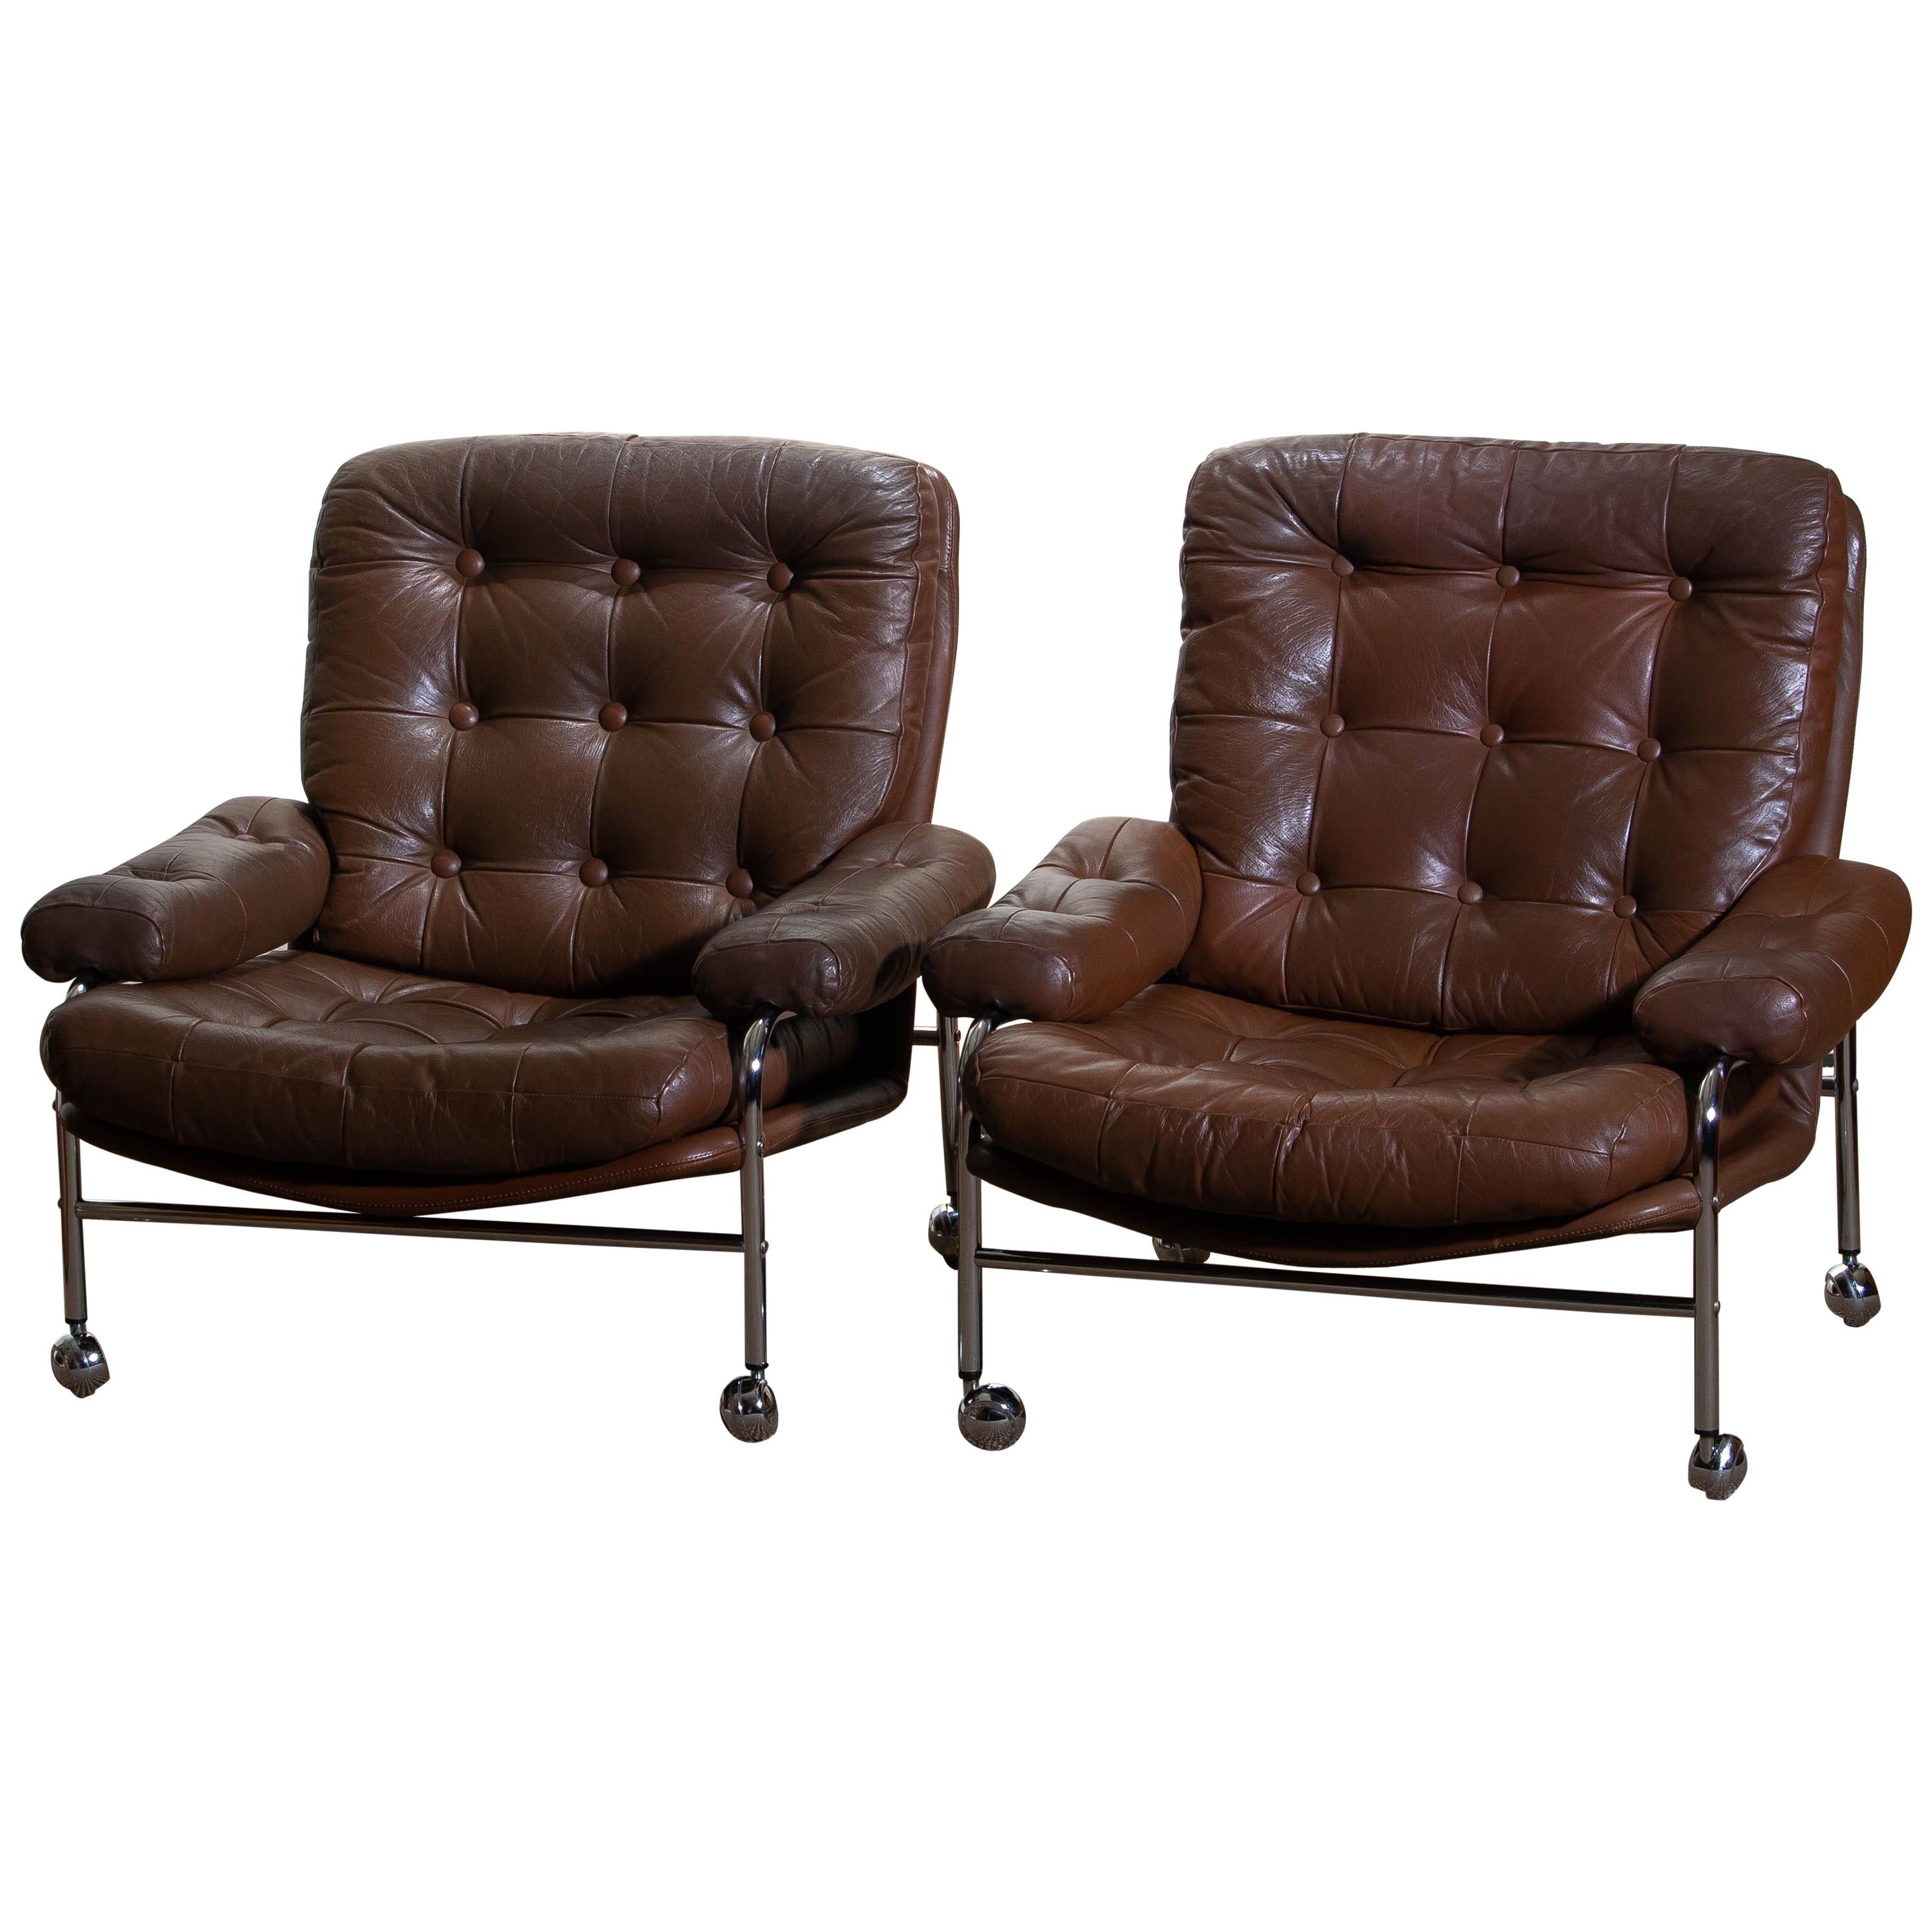 1970s, Chrome and Brown Leather Lounge Chairs by Scapa Rydaholm, Sweden 3